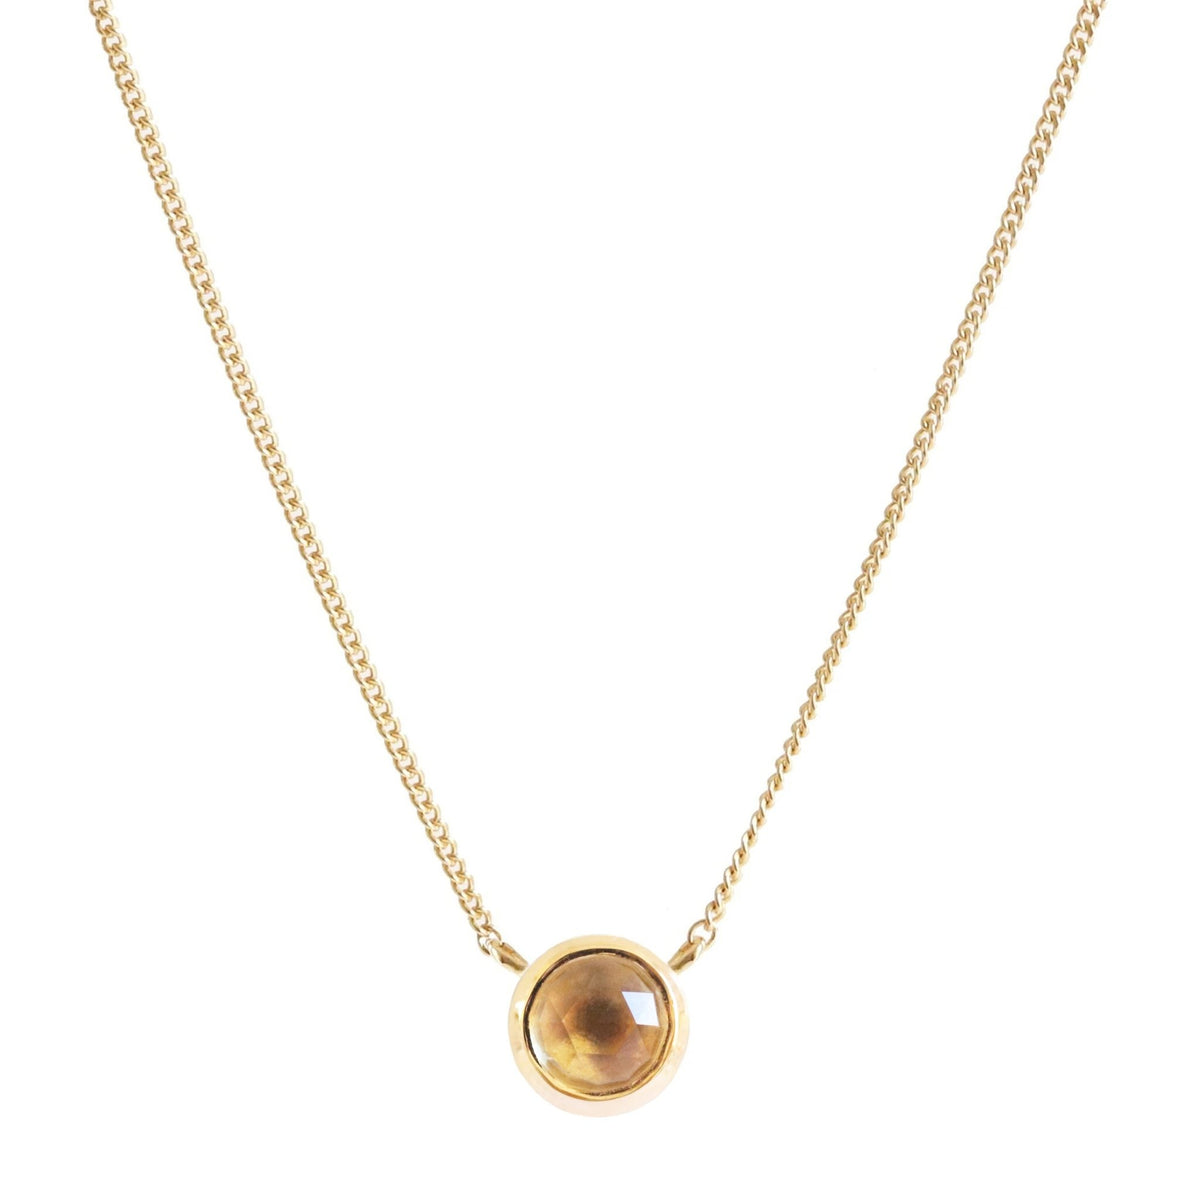 DAINTY LEGACY NECKLACE - CITRINE &amp; GOLD - SO PRETTY CARA COTTER